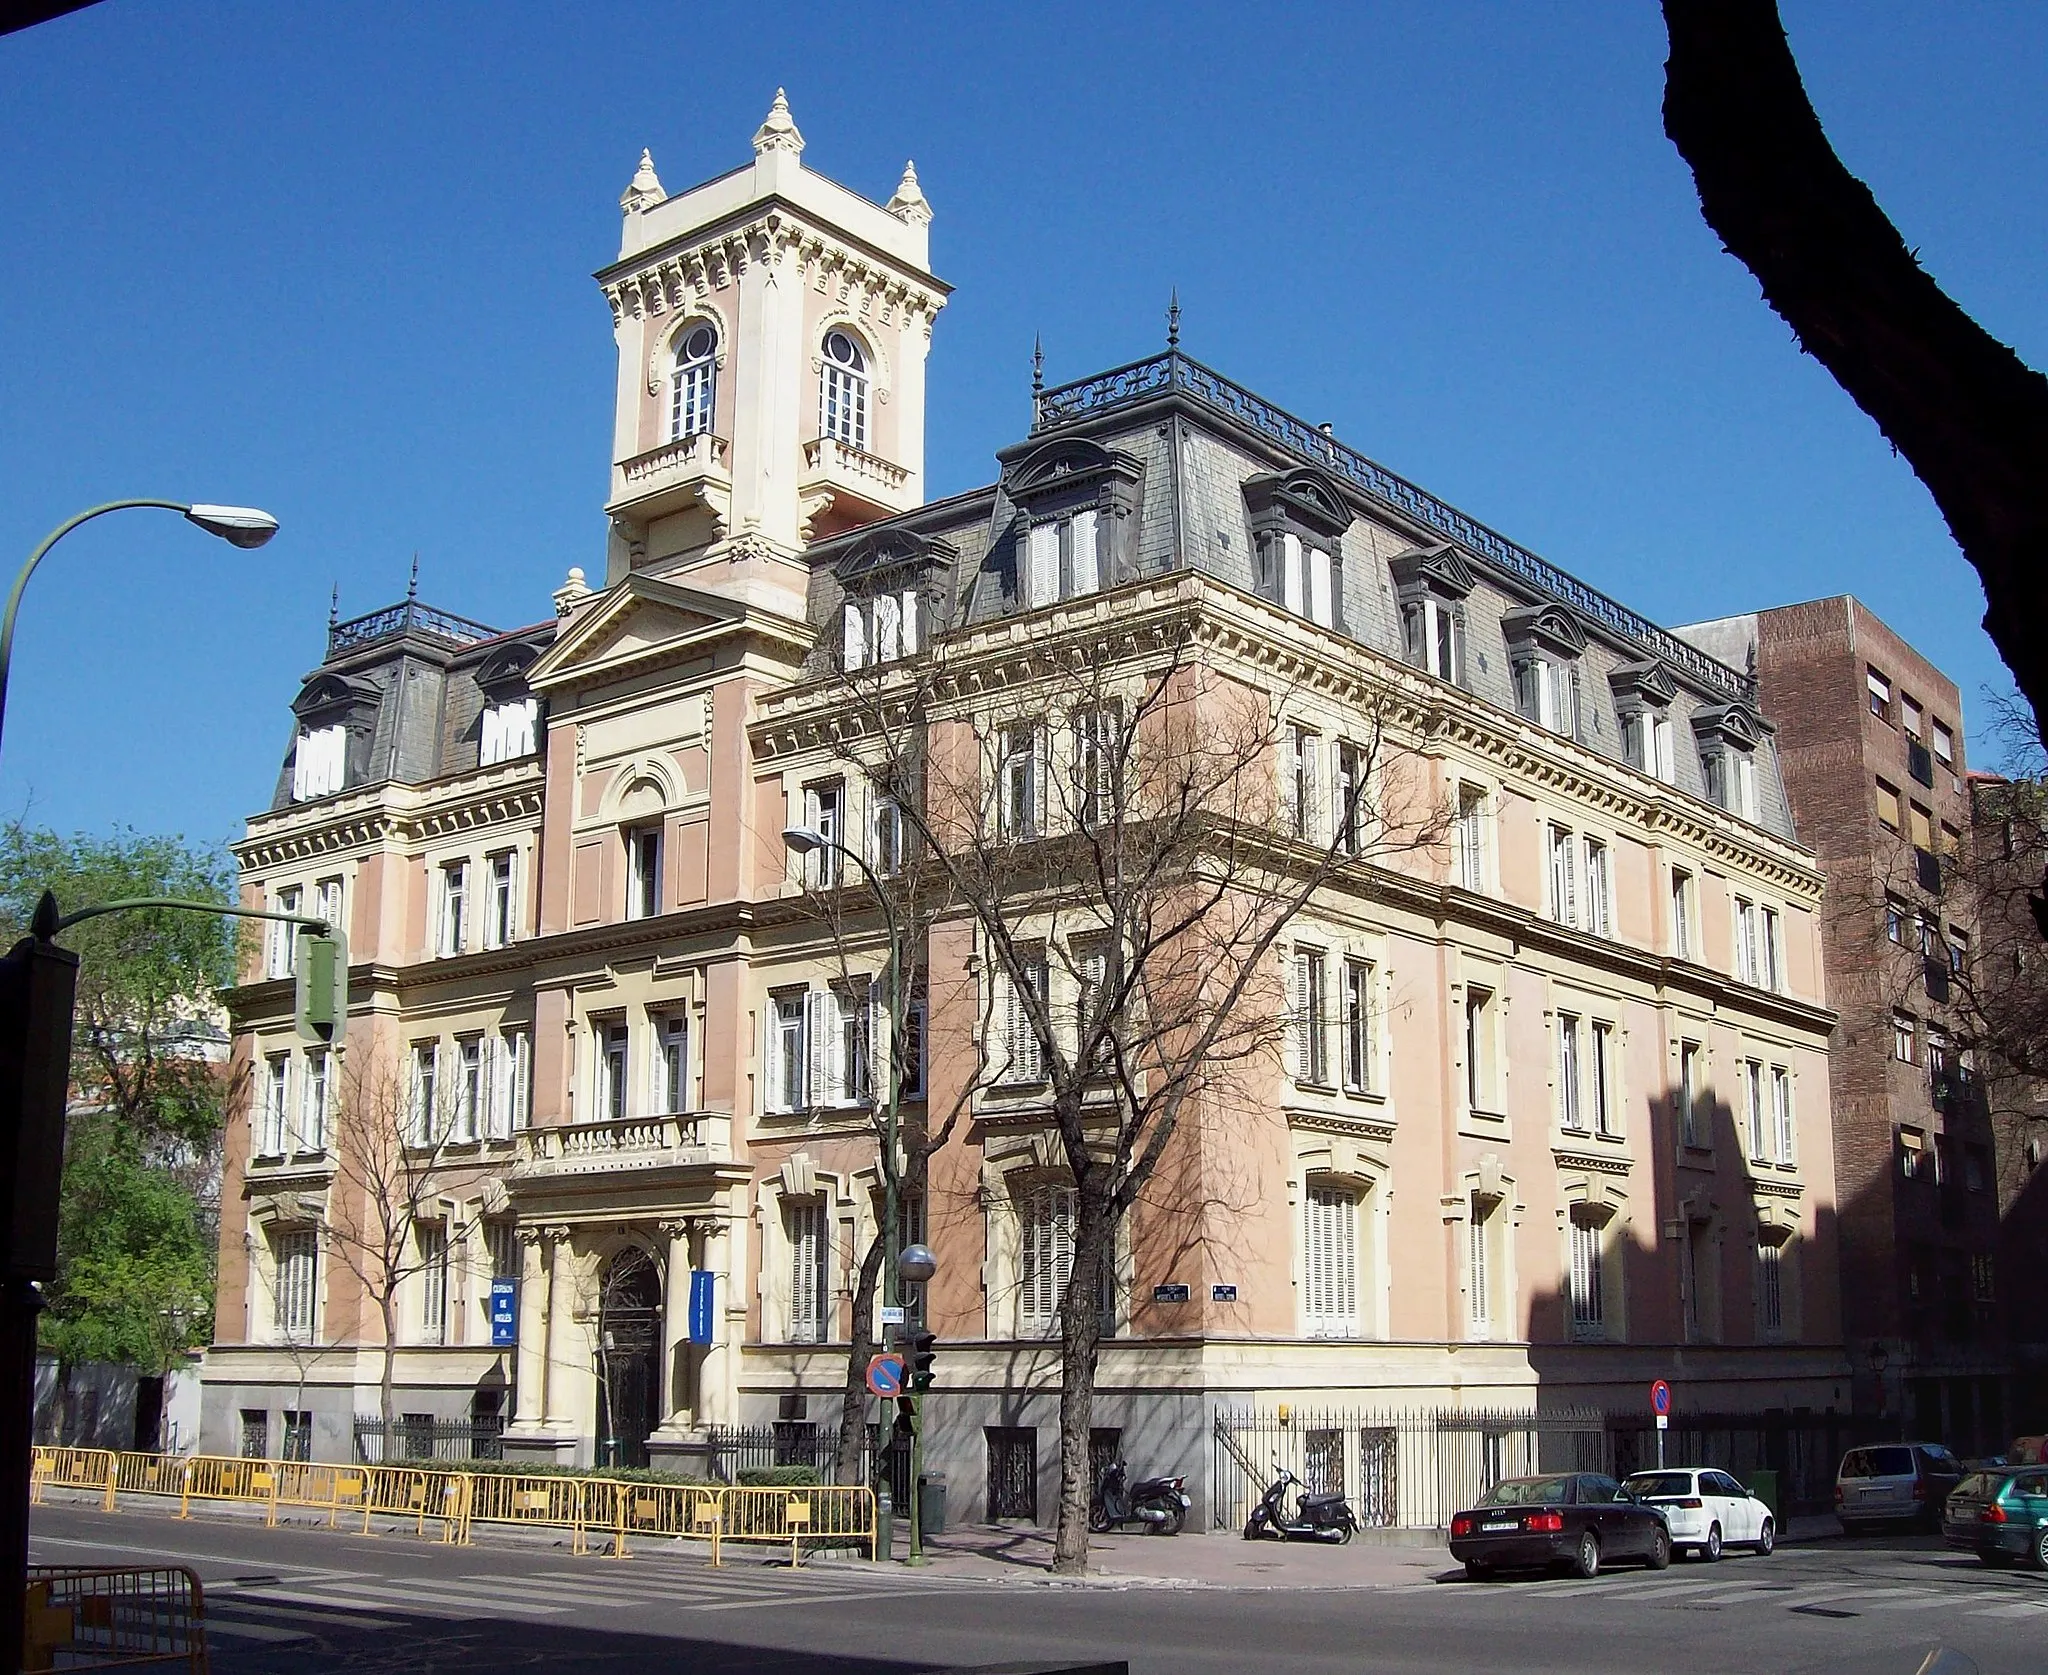 Photo showing: Headquarters of the International Institute in Madrid (Spain), at 8 Calle de Miguel Ángel (street) in Chamberí district. Building was projected in 1906 by Joaquín Saldaña López, and built between 1906 and 1911. Until 2002 it housed the Colegio Estudio (a school).